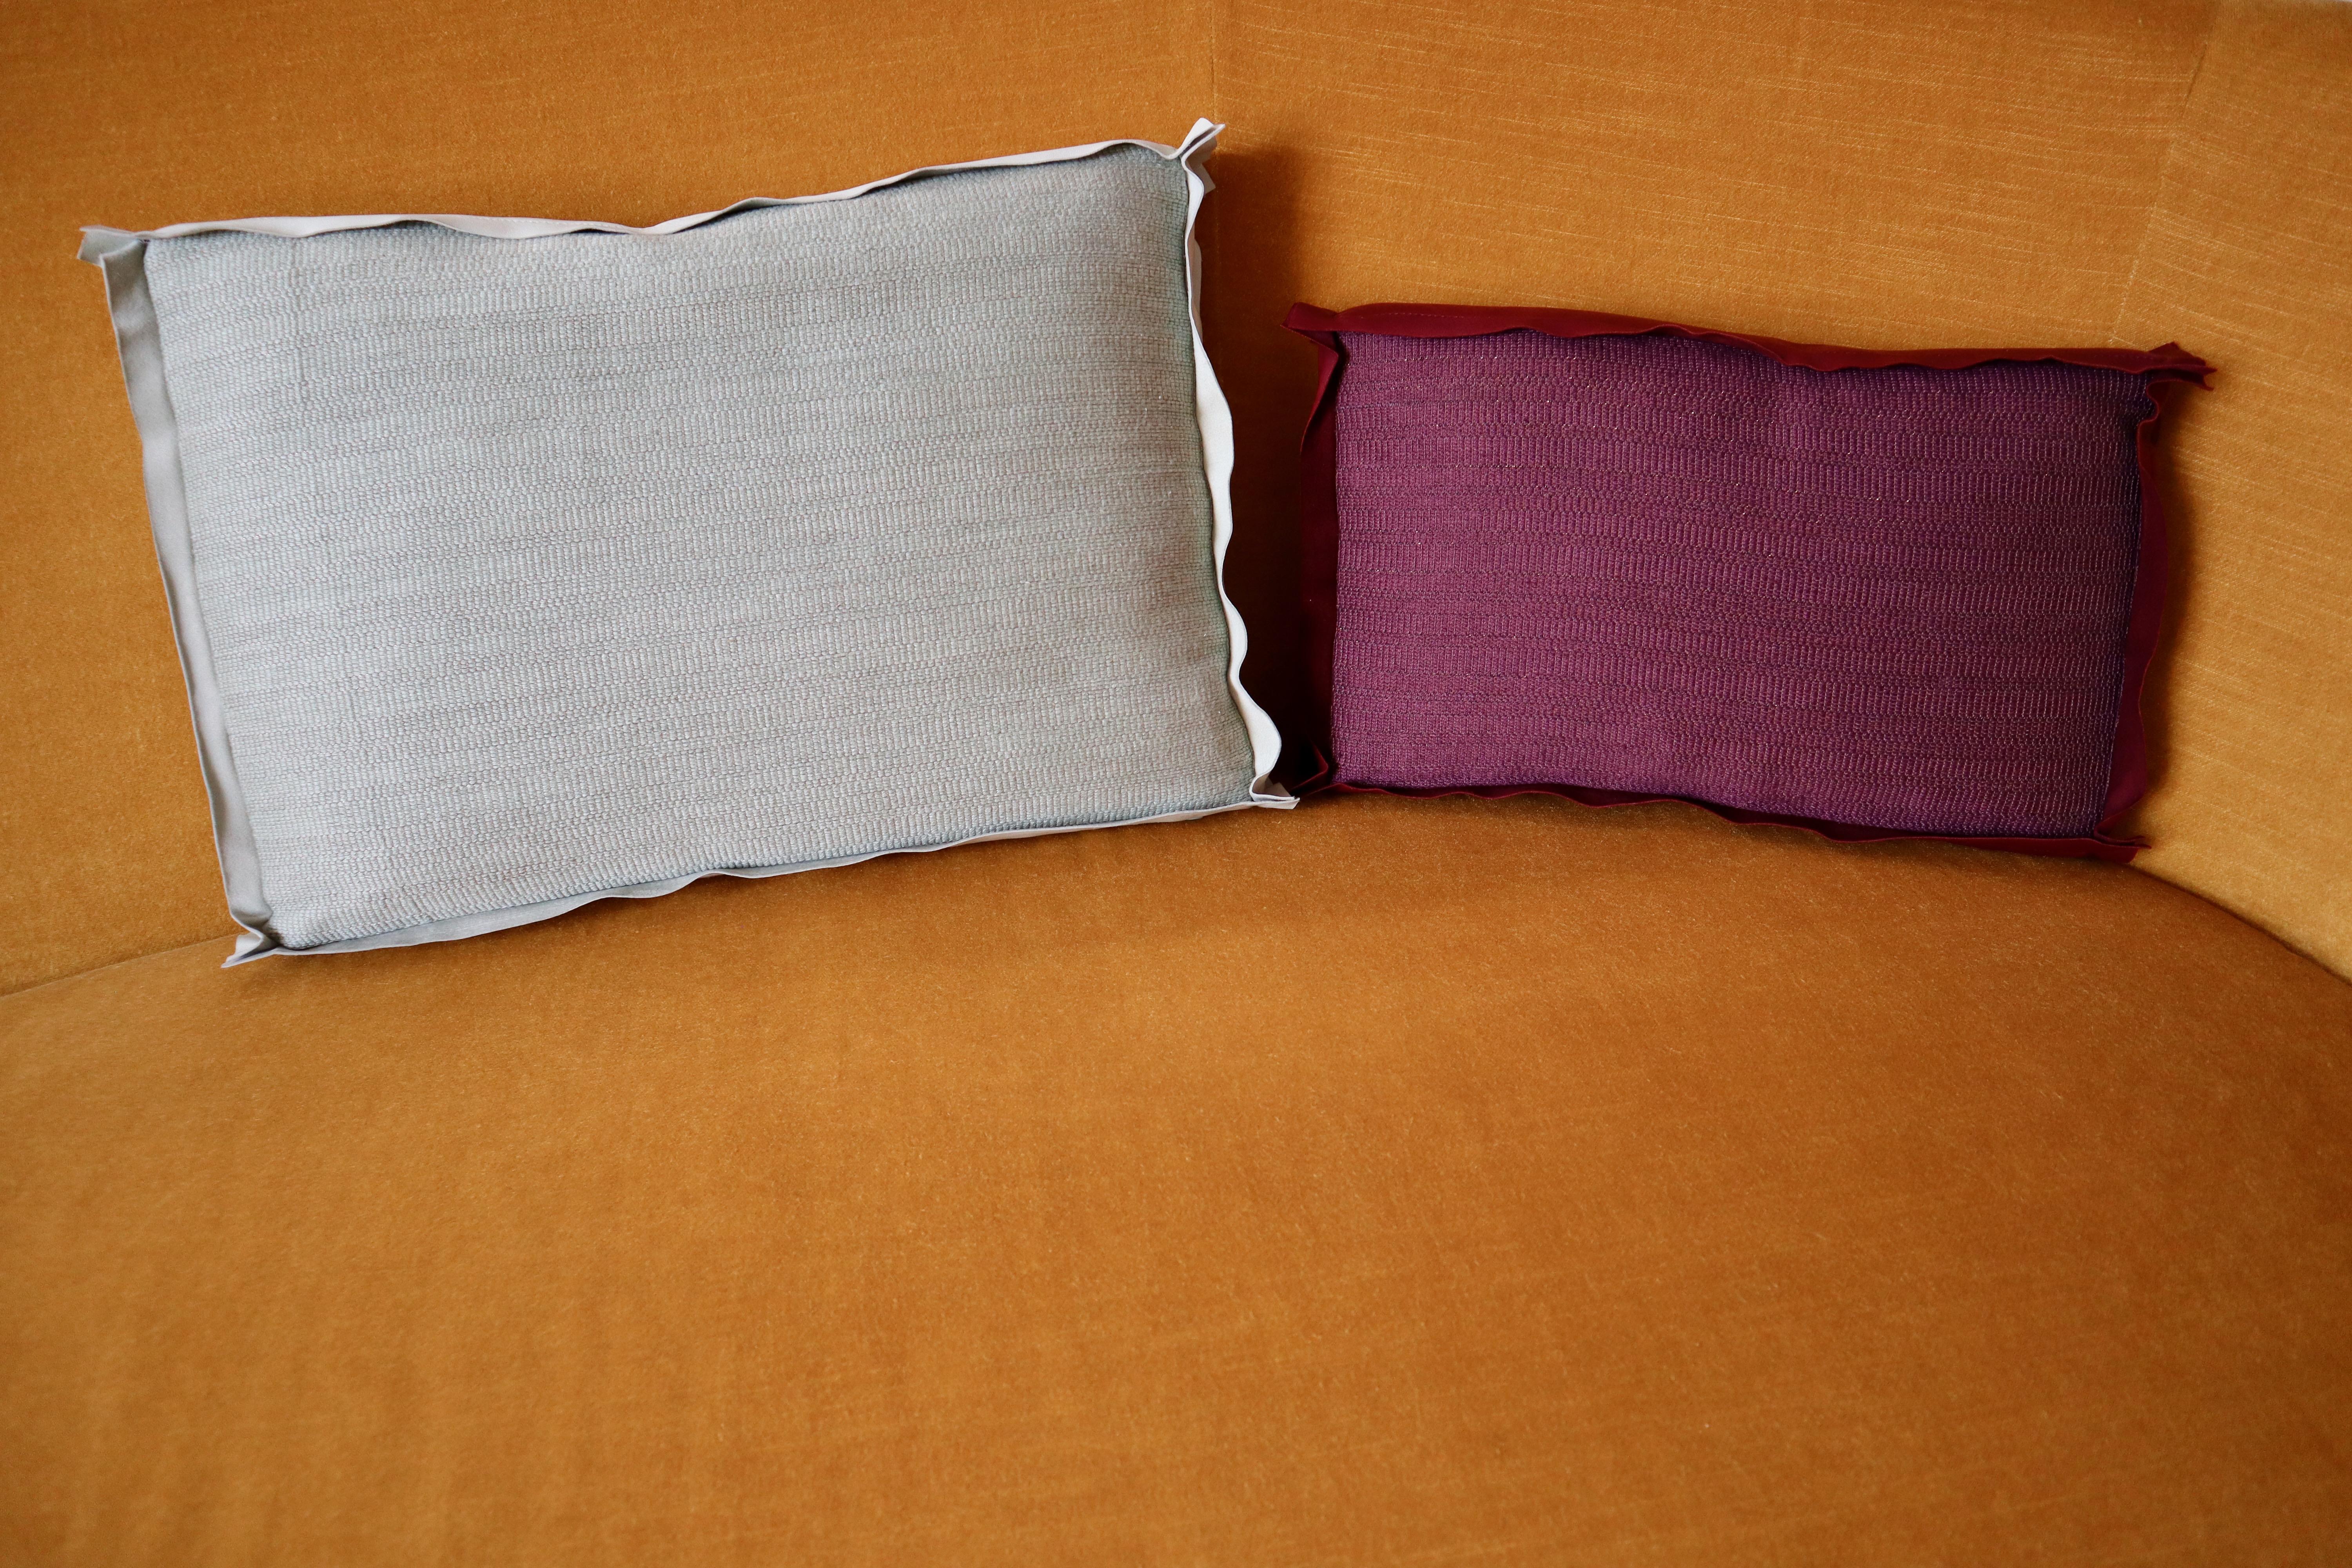 We offer two unique Leather & Fabric Pillow cushions made in France by Toyine.

Toyine’s artisans use their expertise to create unique and exclusive textiles for  interiors. The contemporary fabrics are woven in France on traditional looms with